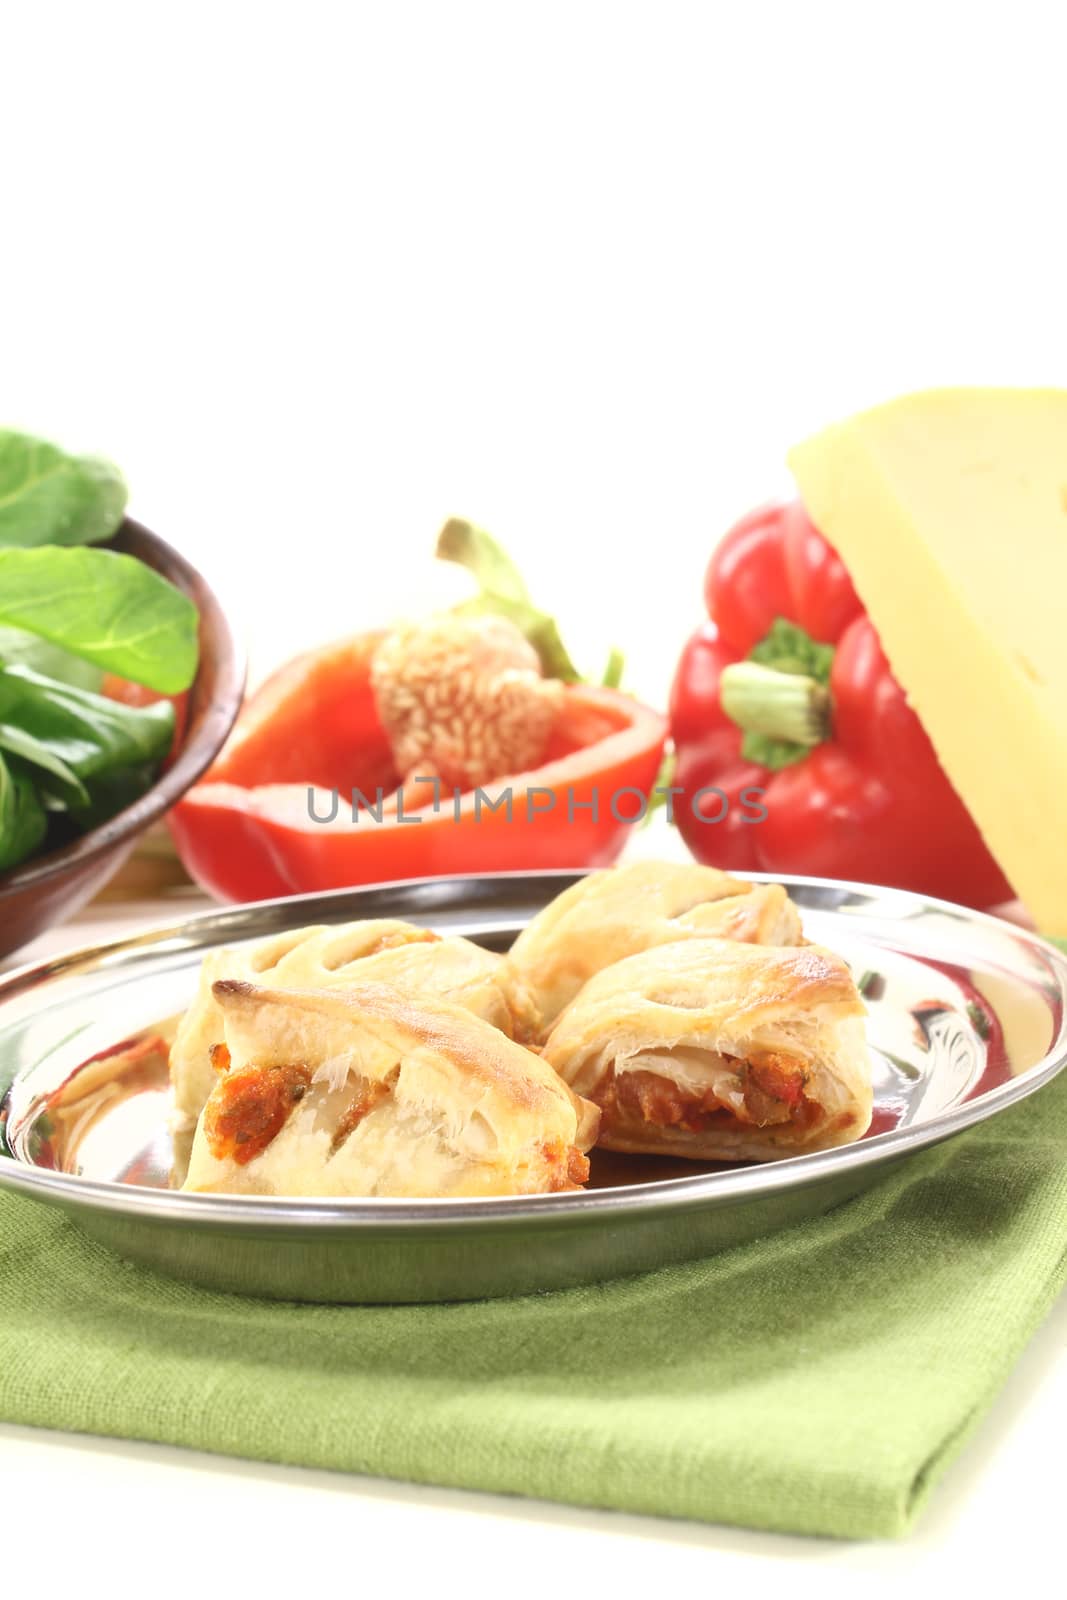 baked Puff pastry with bell peppers and cheese filling on a light background